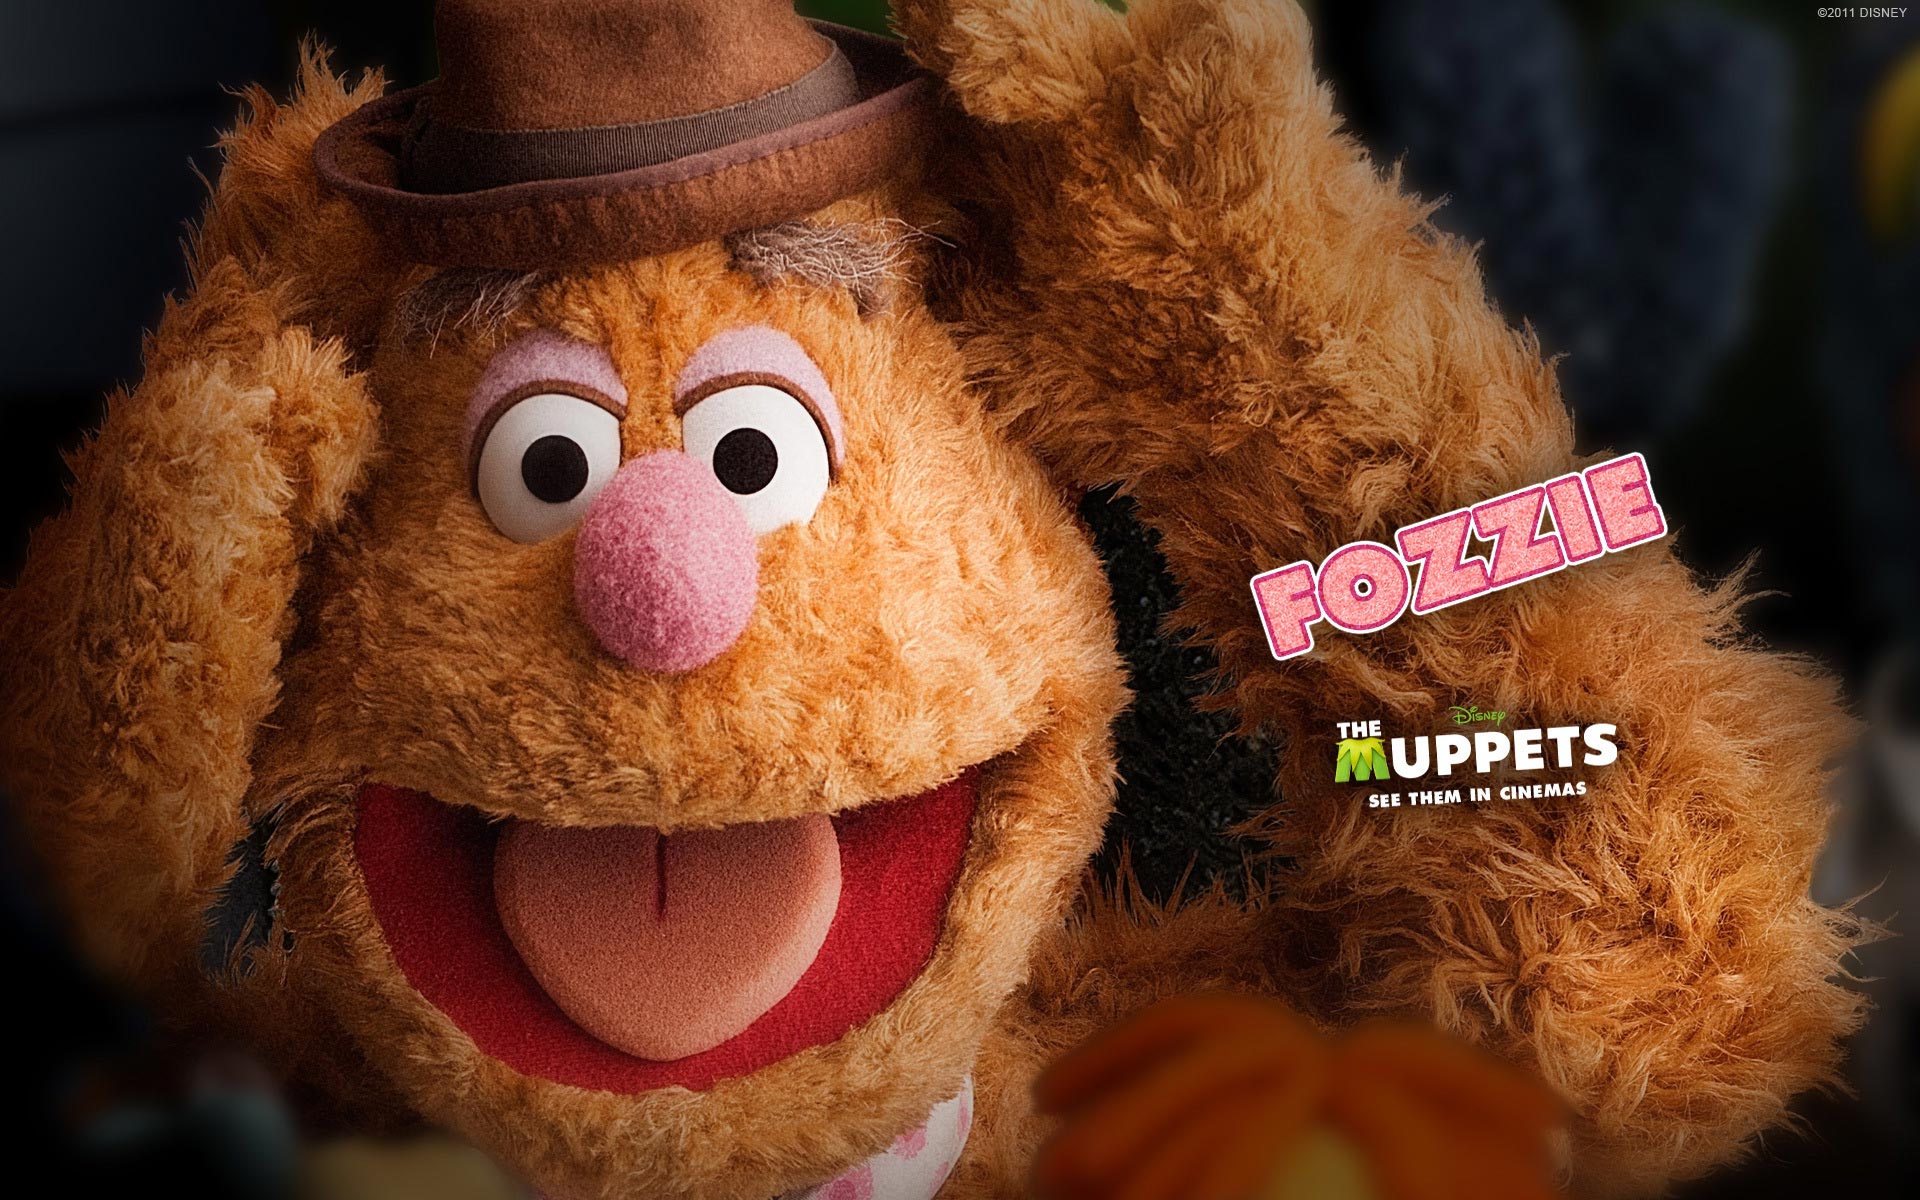 Fozzie, The Muppets Wallpaper